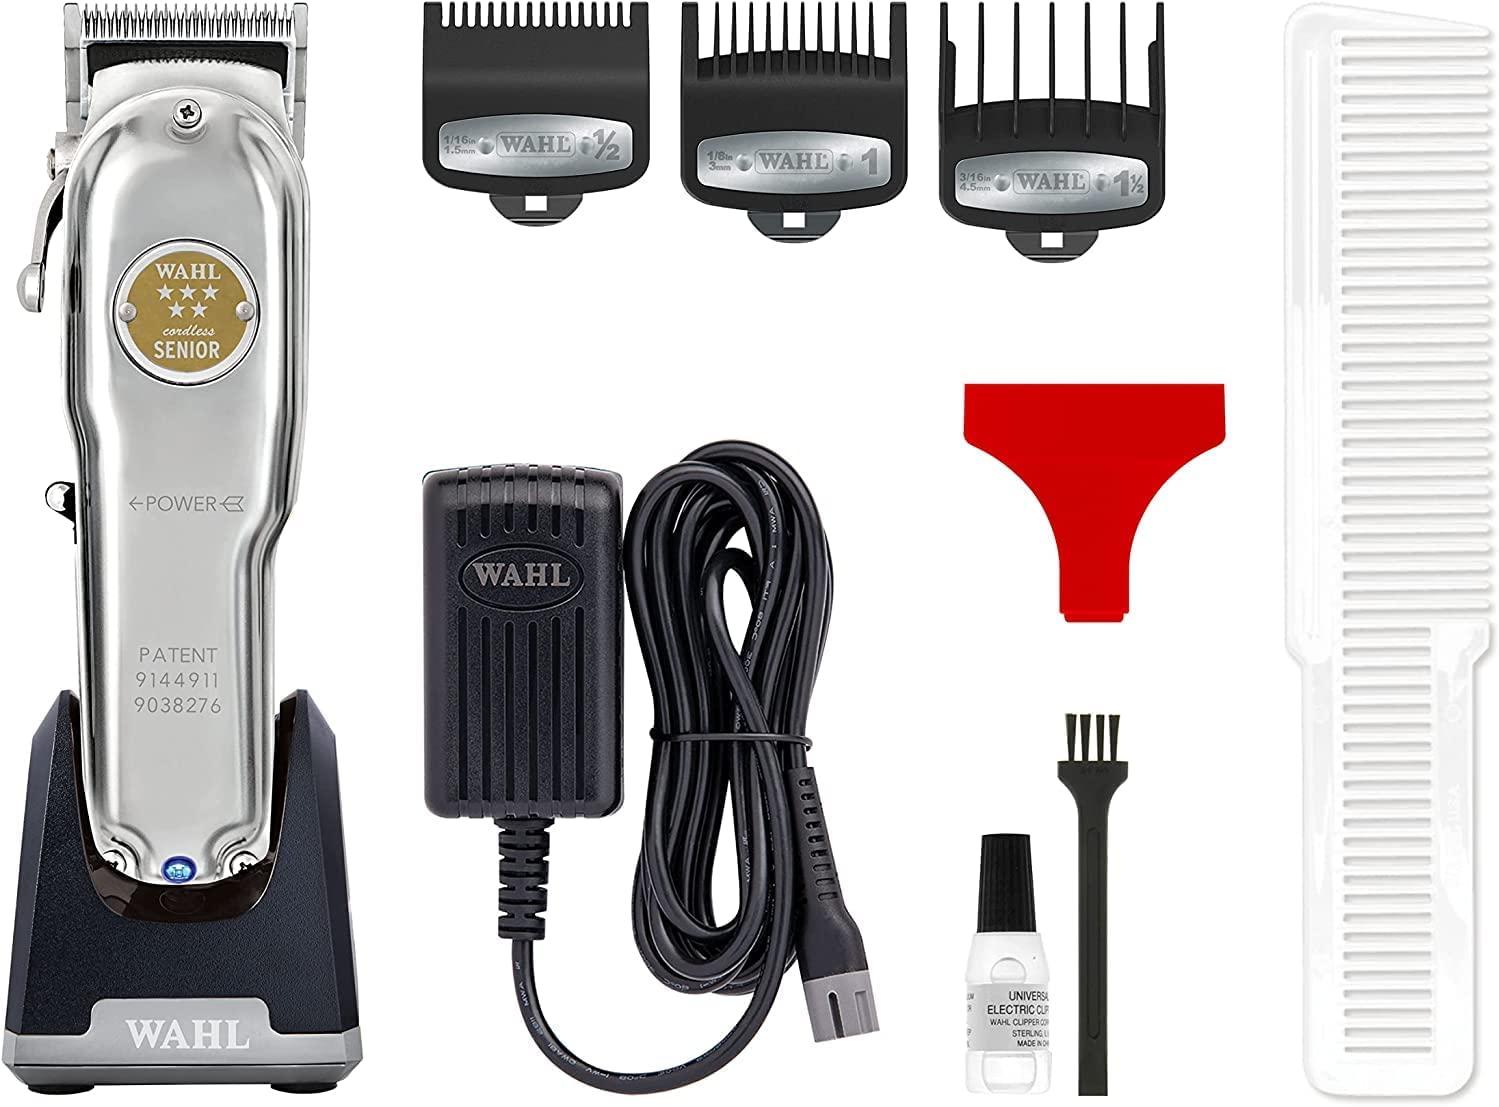 LIMITED EDITION: All Metal WAHL Professional Cordless, 60% OFF